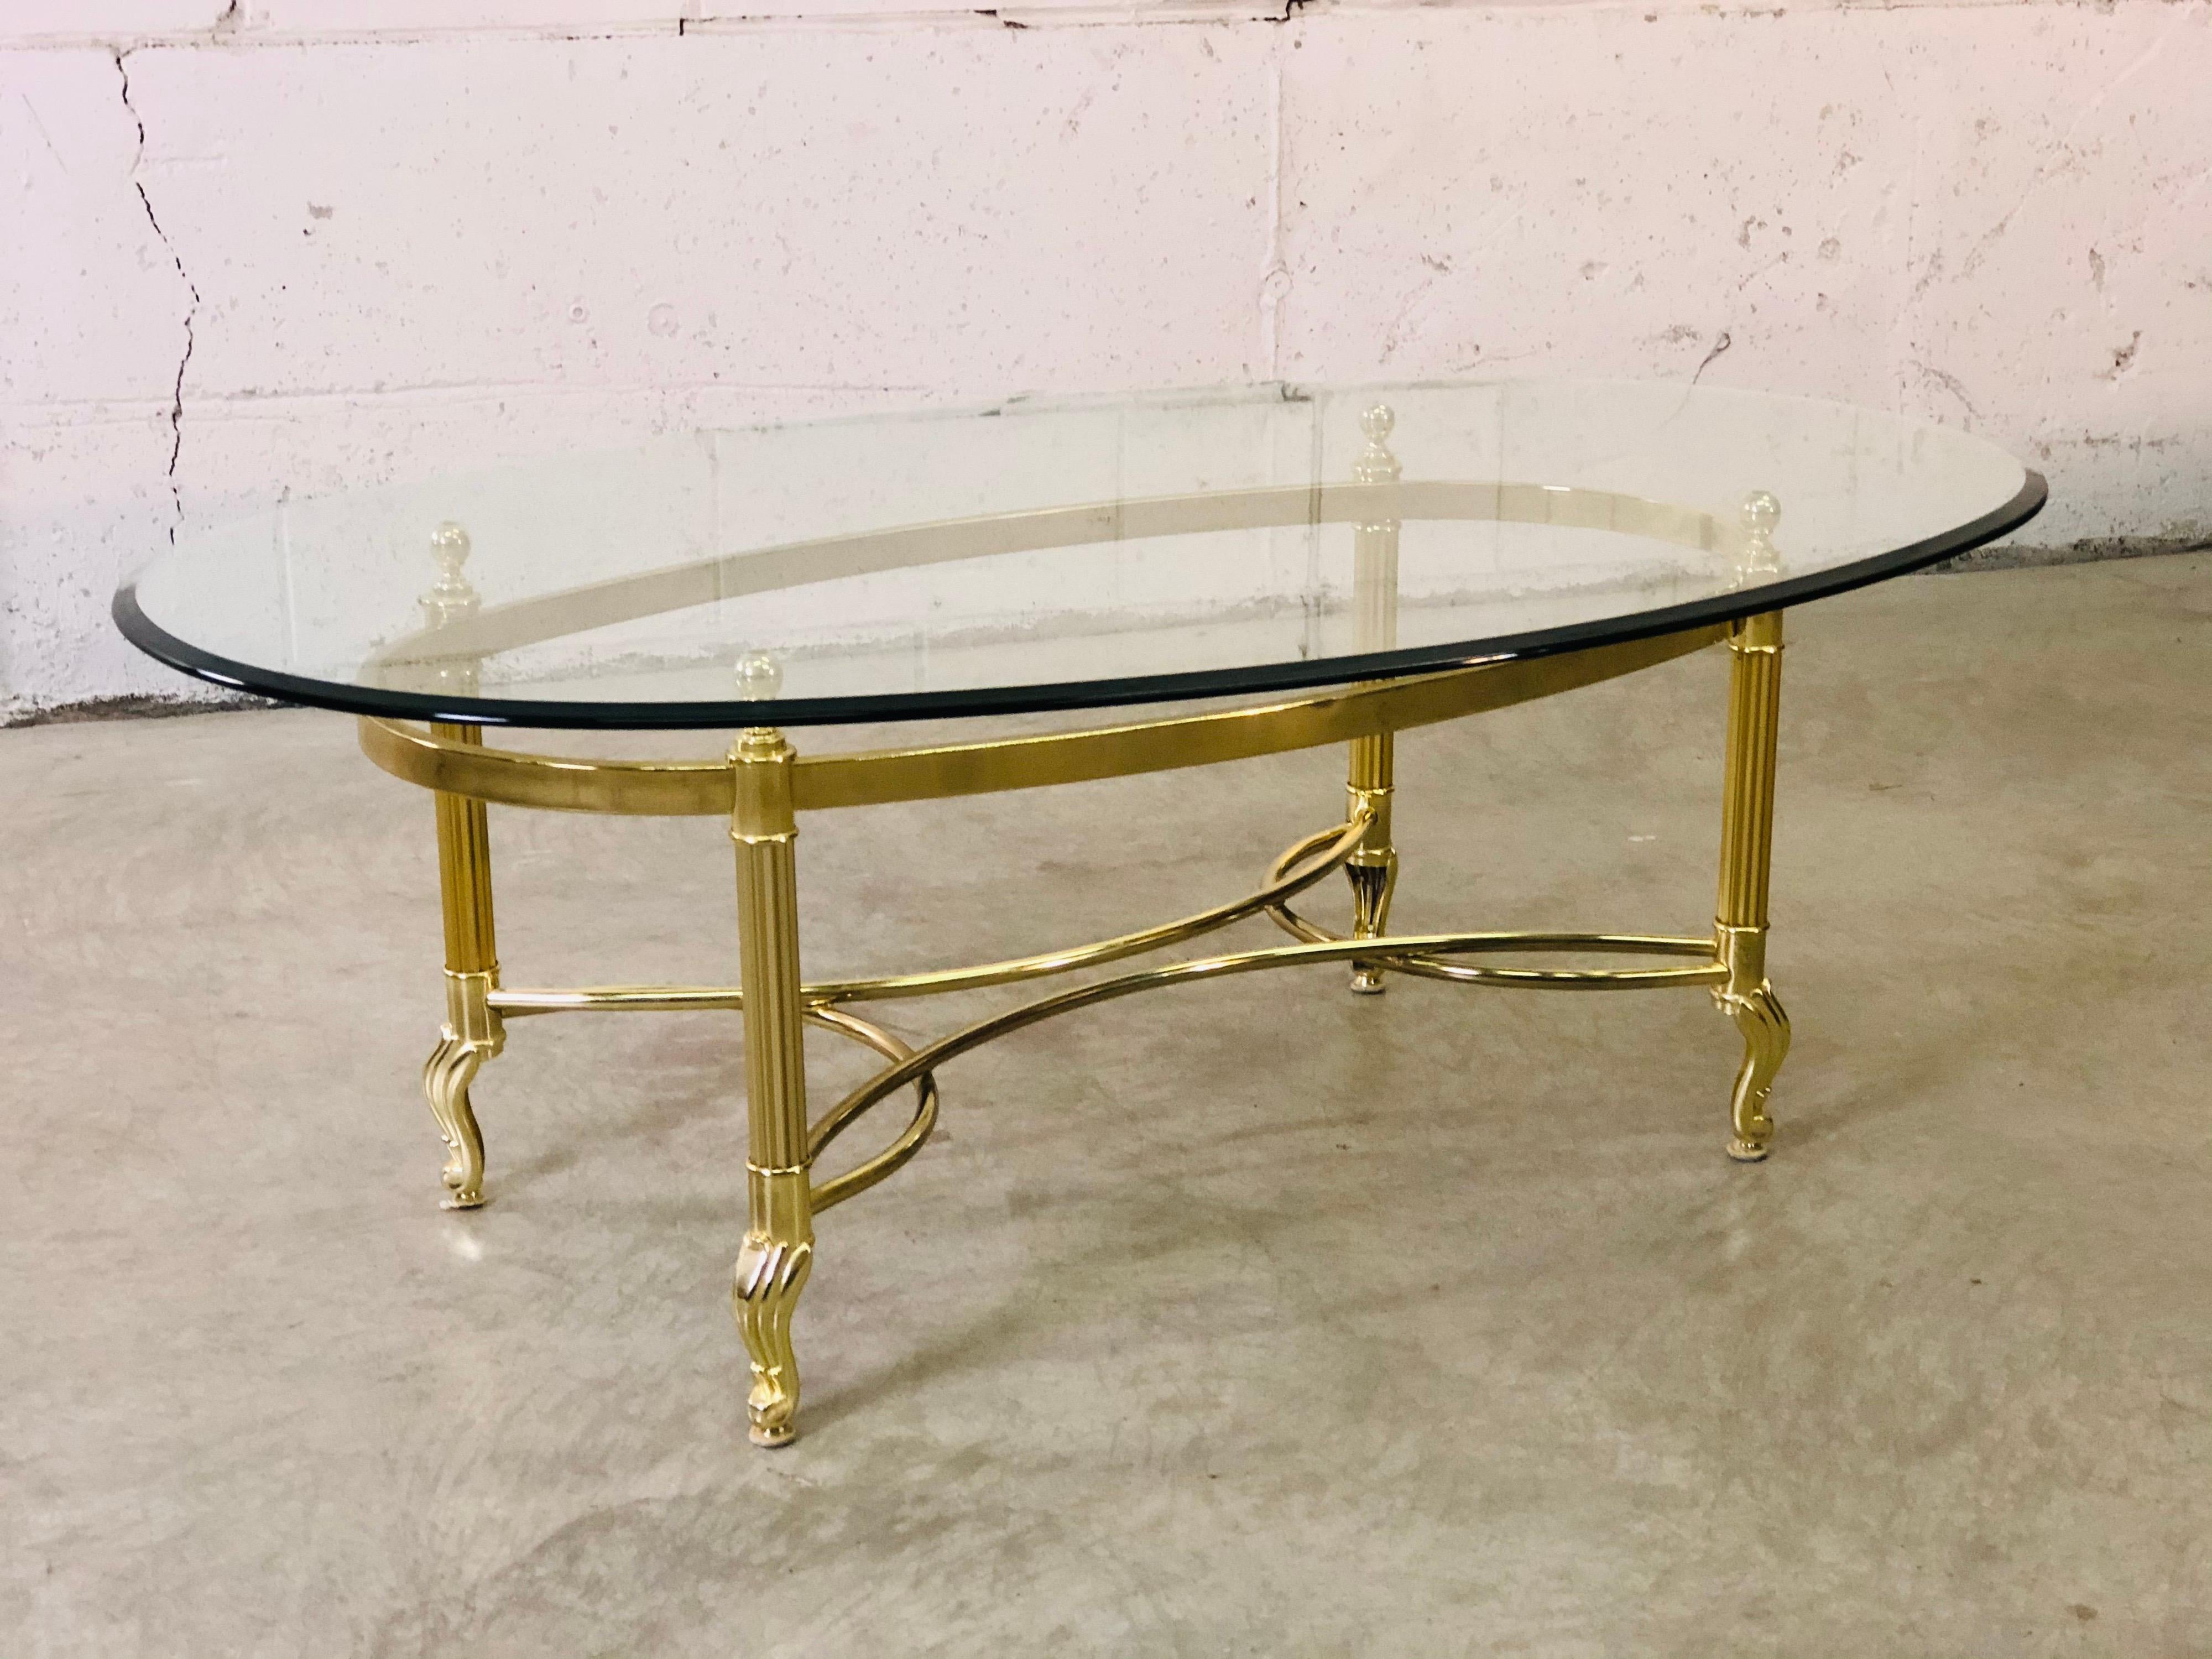 Vintage 1960s LaBarge brass base and glass top oval coffee table with scroll feet. Light tarnish from use in spots. No marks.